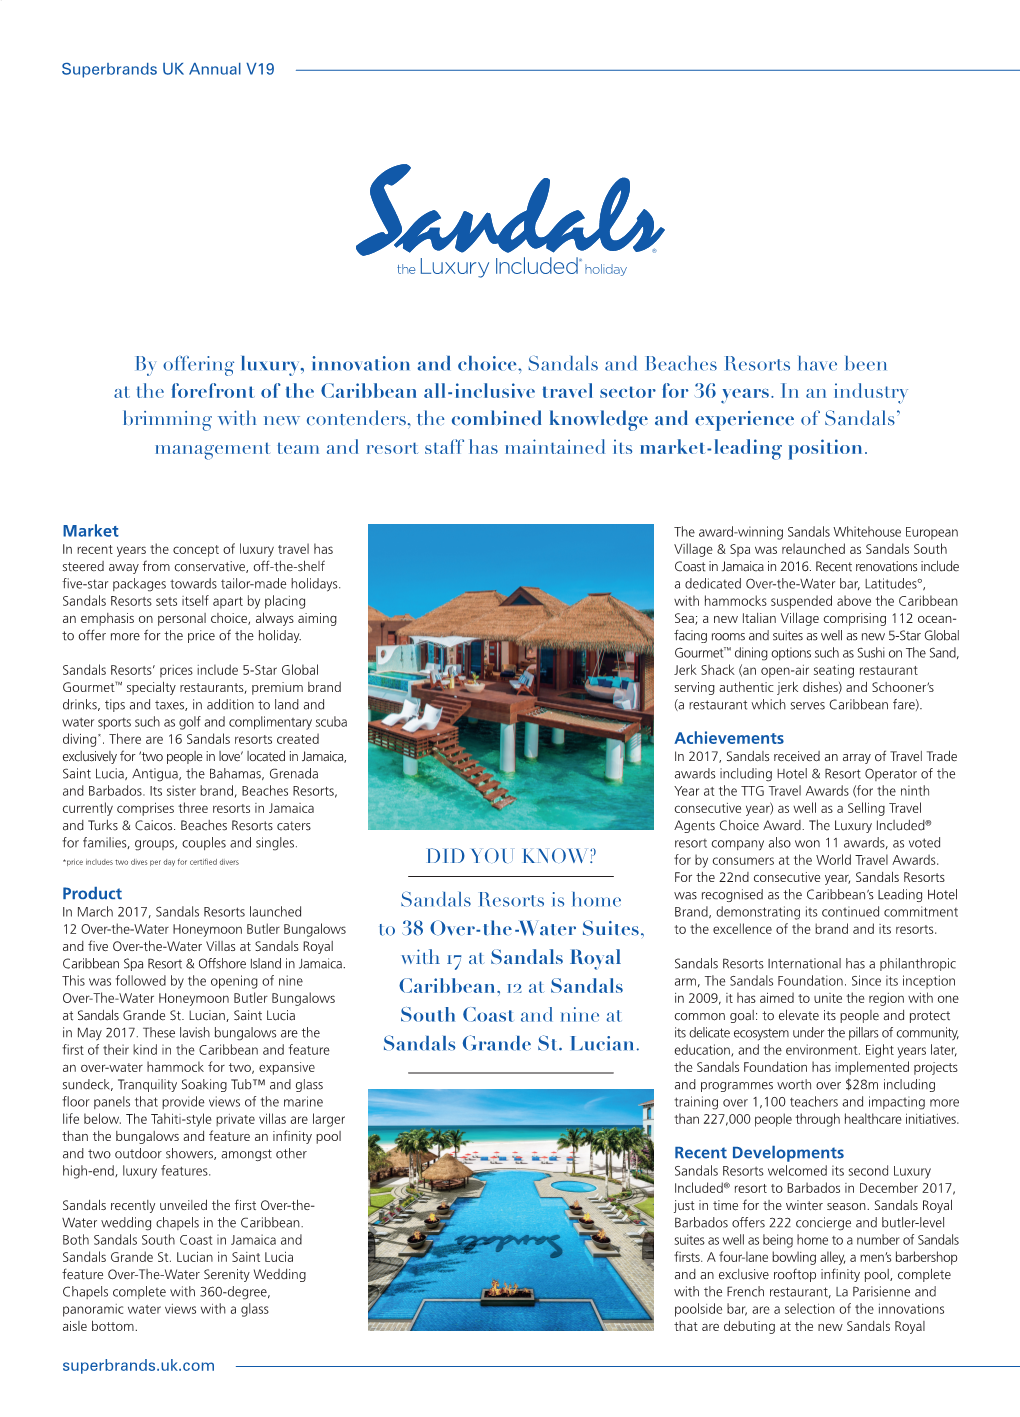 By Offering Luxury, Innovation and Choice, Sandals and Beaches Resorts Have Been at the Forefront of the Caribbean All-Inclusive Travel Sector for 36 Years